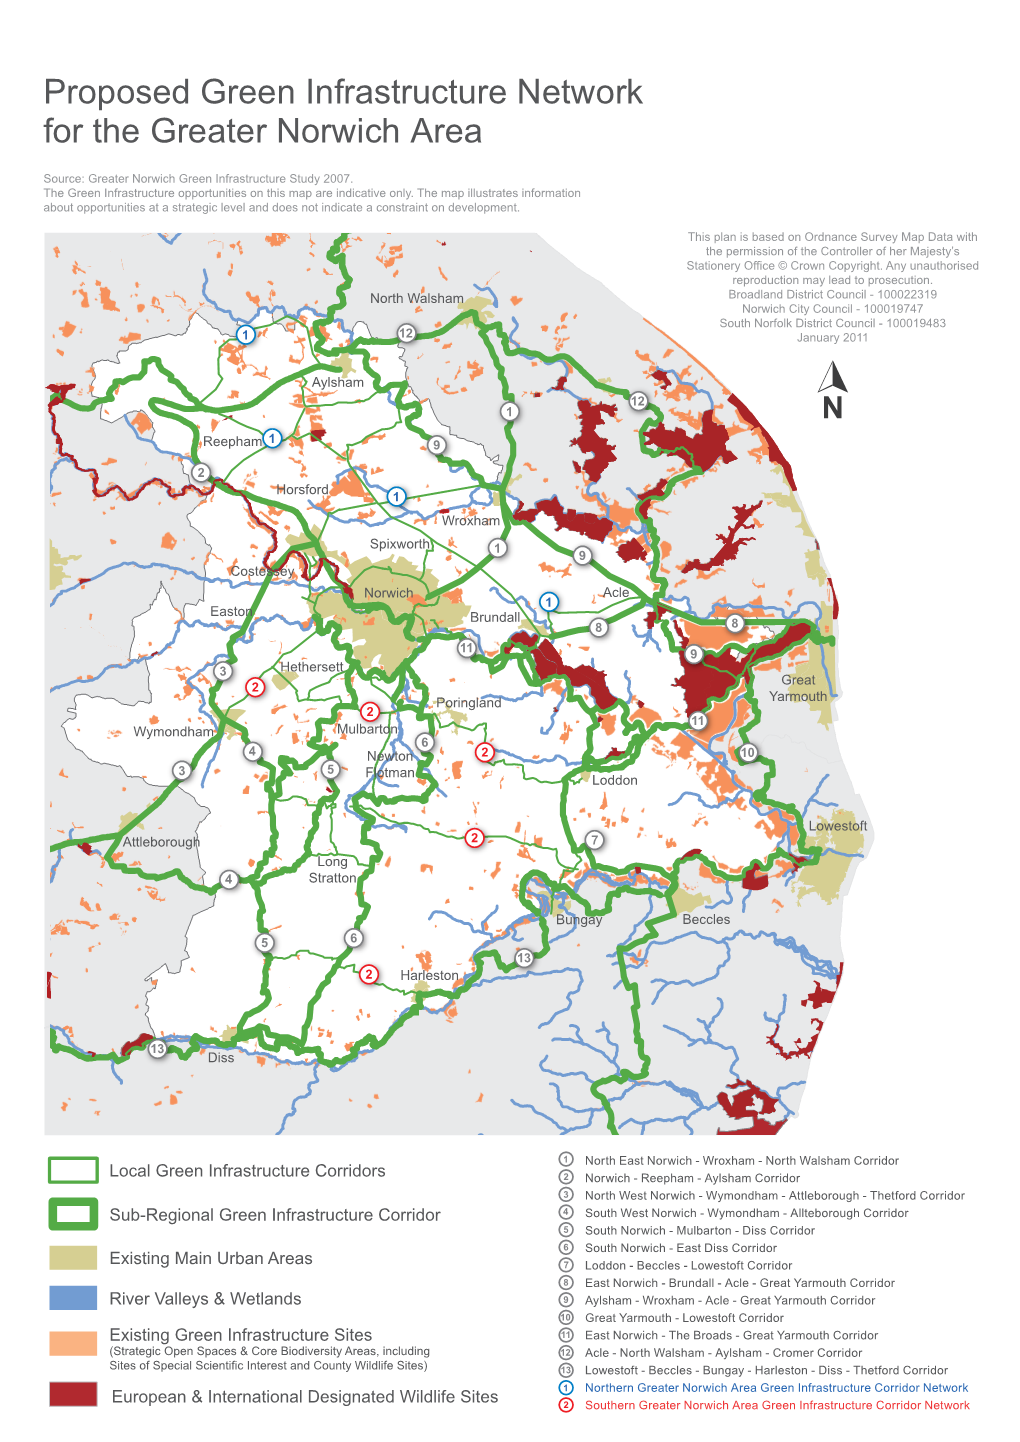 Proposed Green Infrastructure Network for the Greater Norwich Area